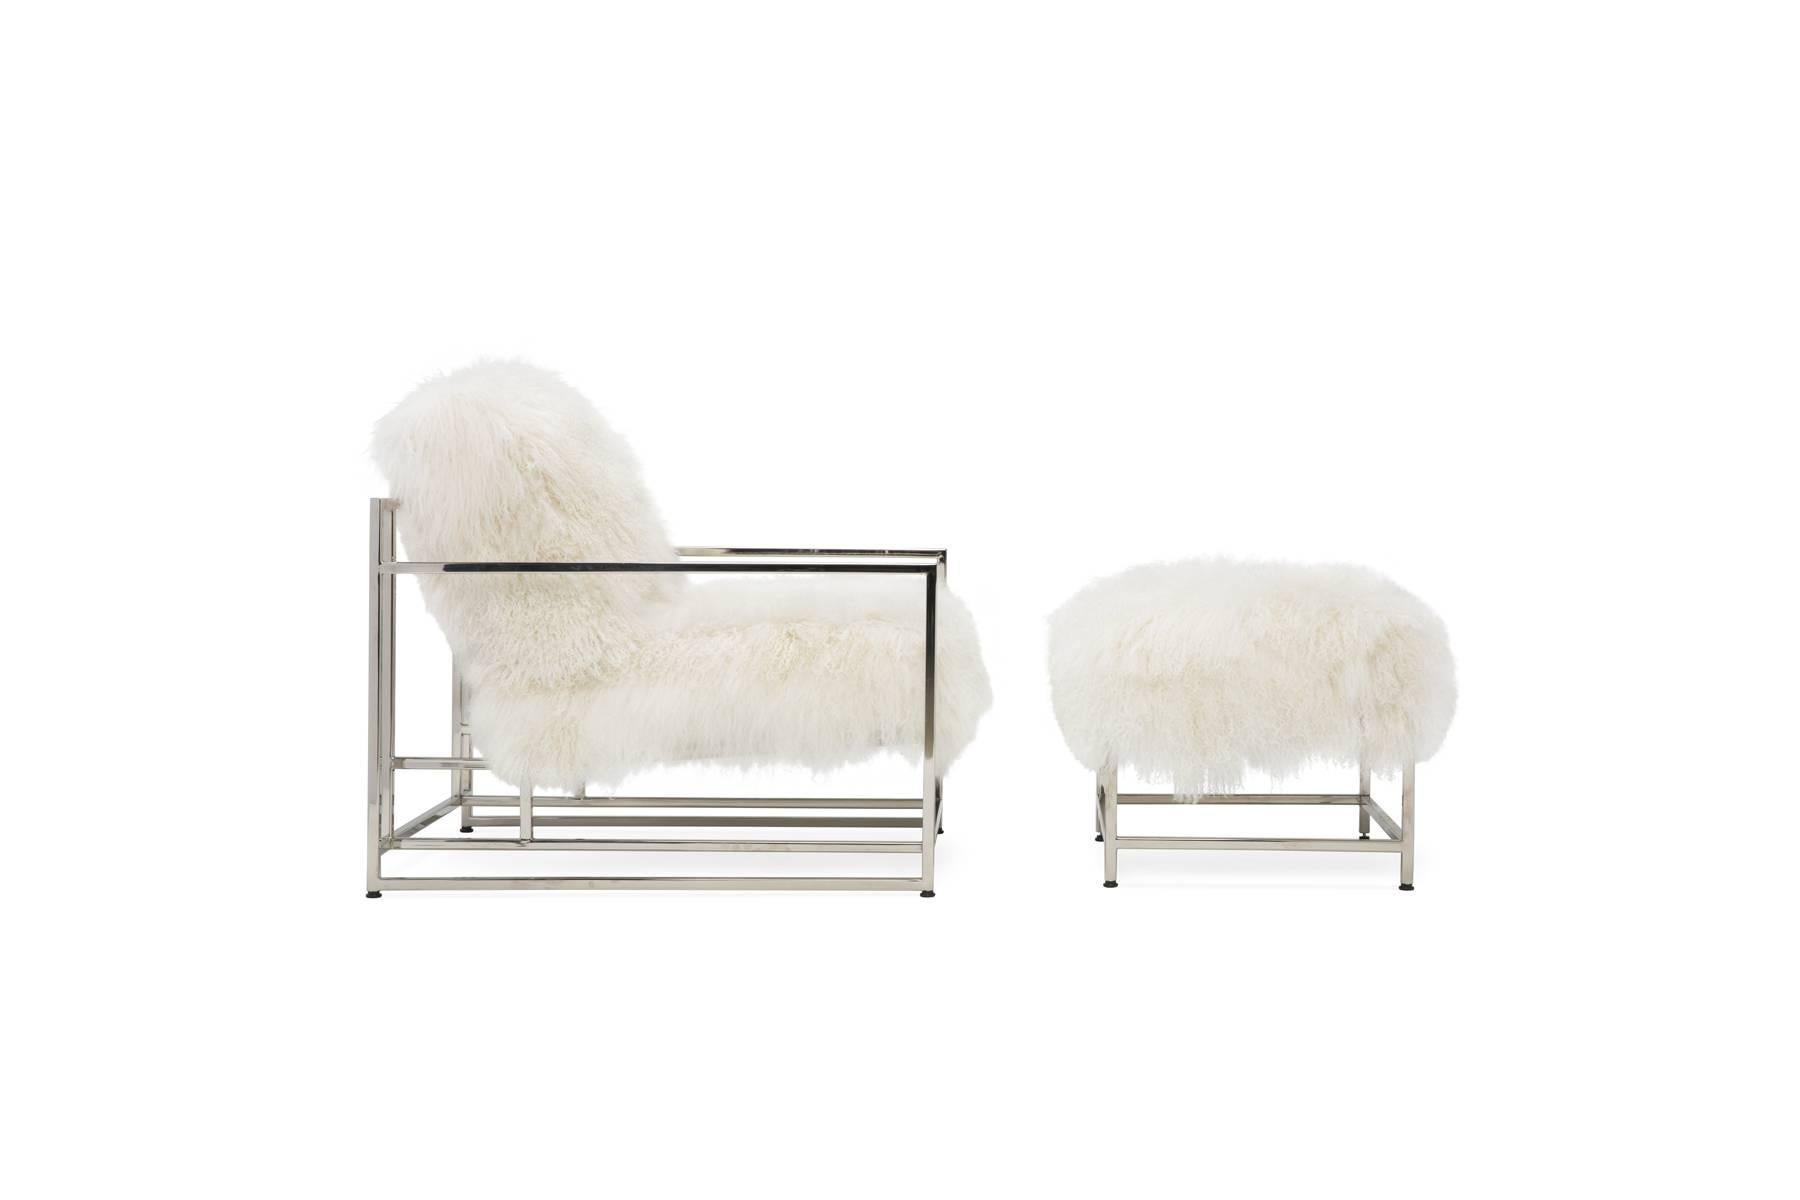 This ultra luxurious version of The Inheritance collection armchair and ottoman has super soft white Mongolian sheepskin upholstery, black webbing and leather belts, and a polished nickel frame finish.
Measures: 
Armchair dimensions 31.5 x 36 x 30